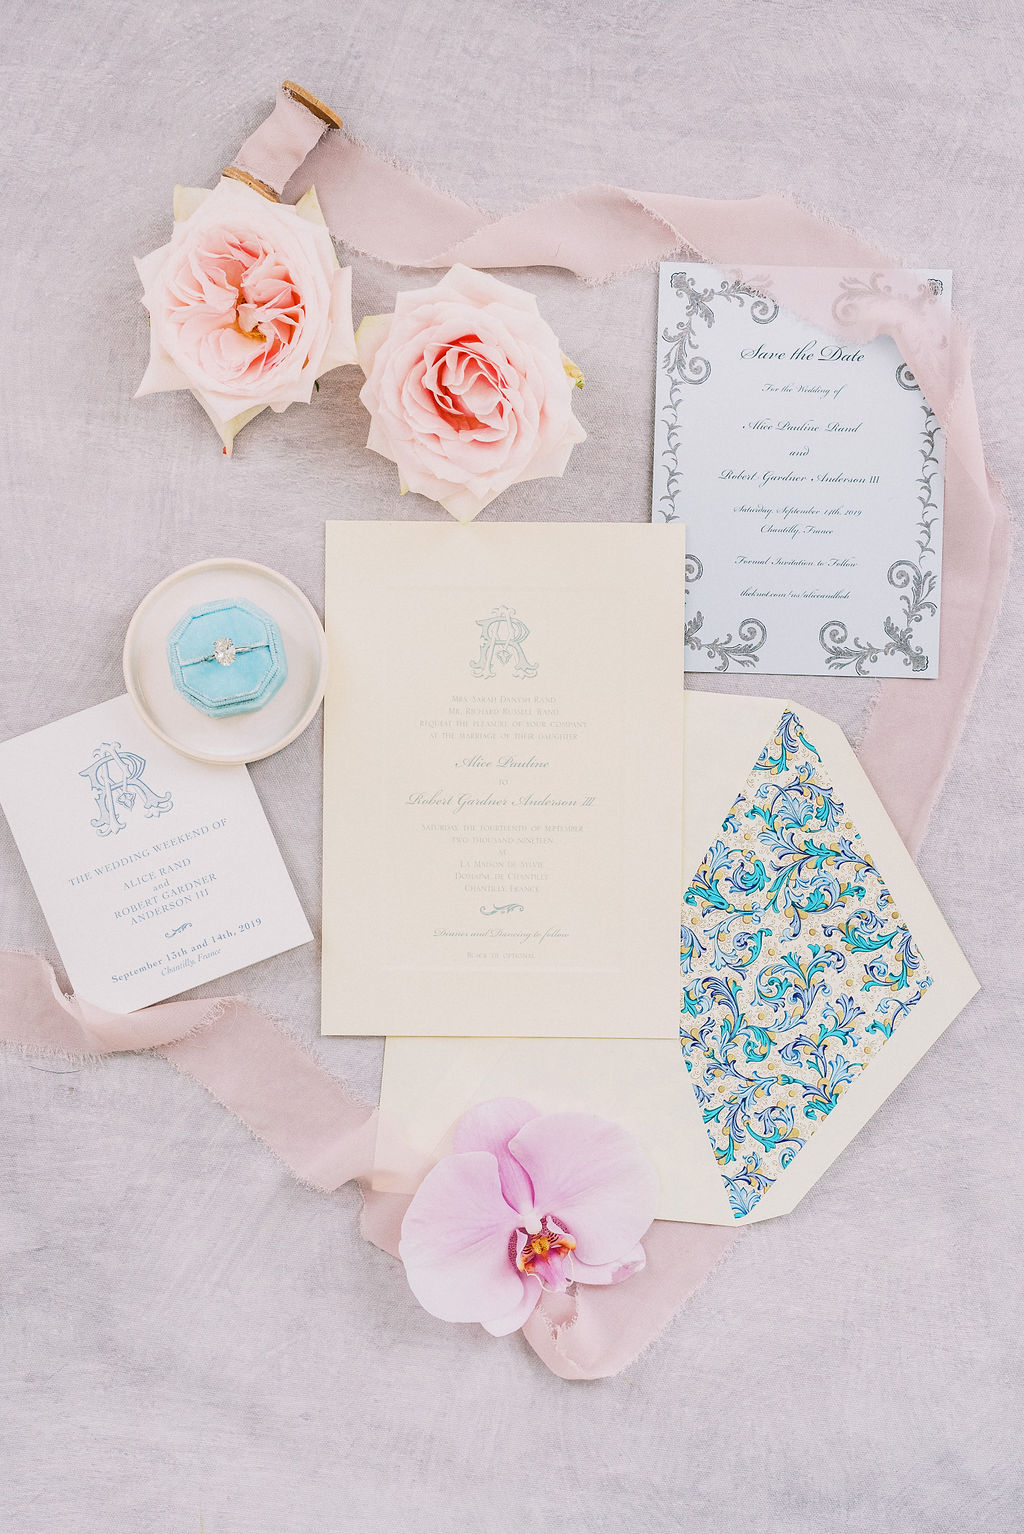 Wedding invitations for a French château wedding planned by Fête in France